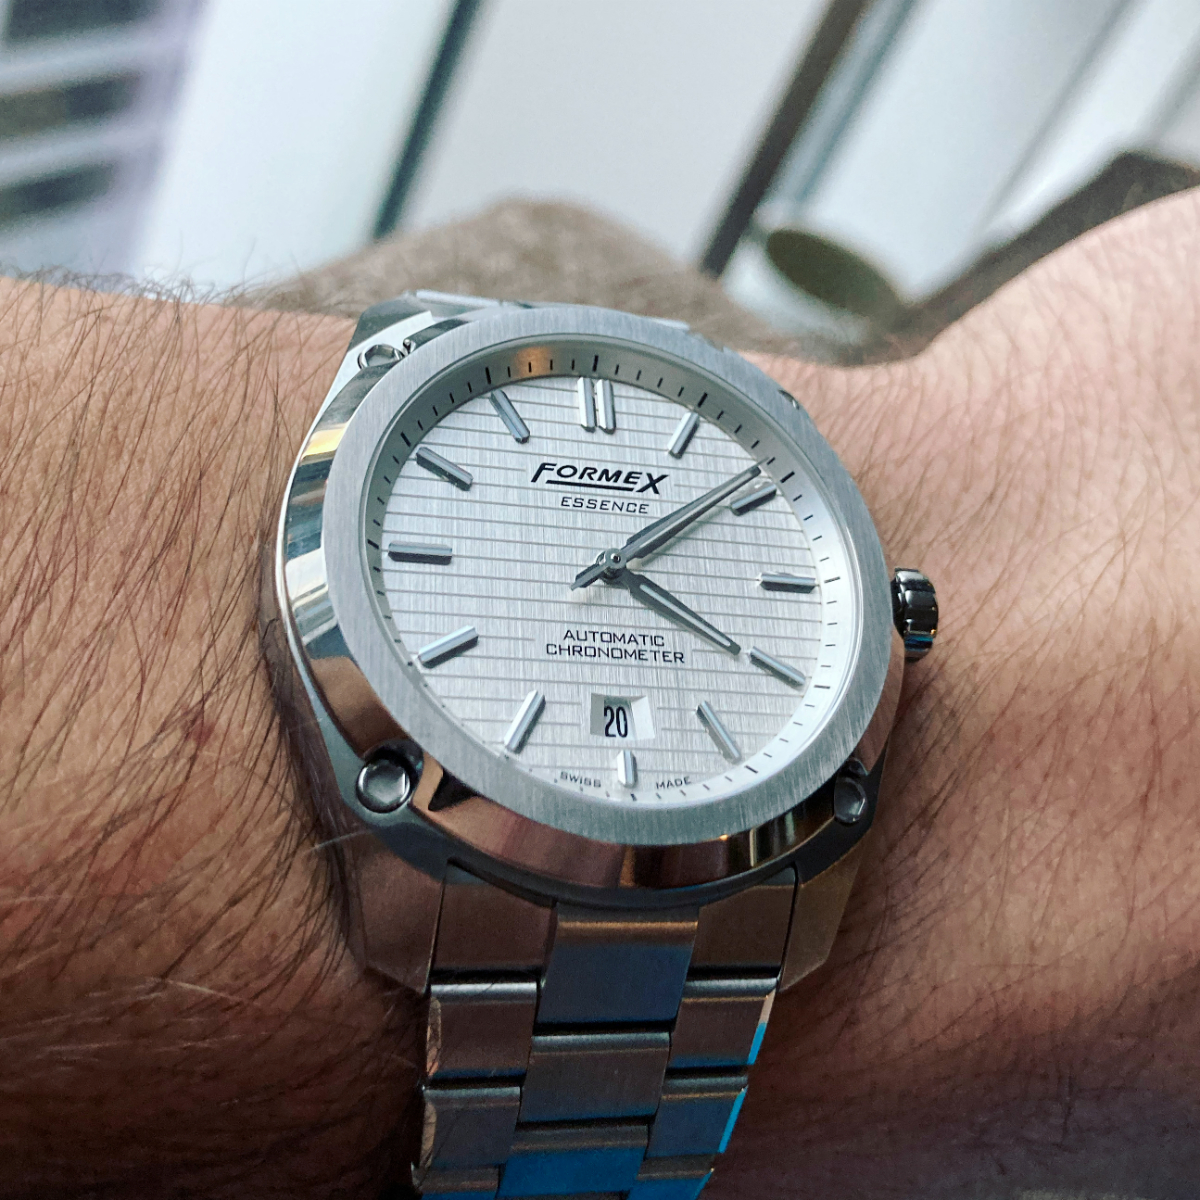 Owner Review: Formex Essence Automatic Chronometer